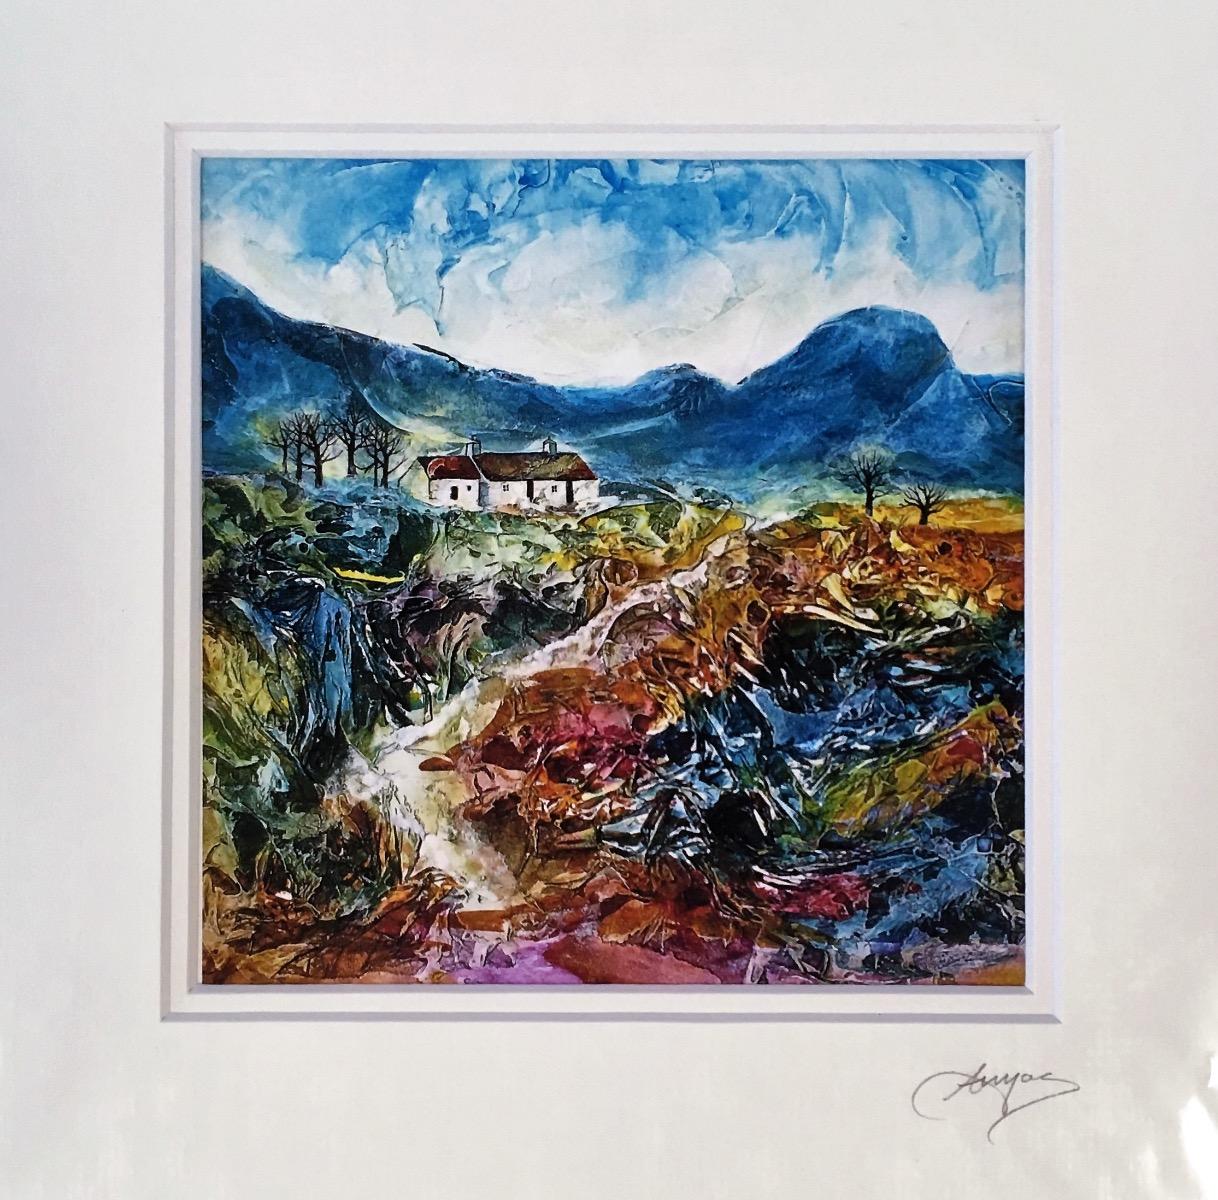 Anya Simmons – This is a signed limited edition giclée print of the original “Heather Bothy”. The print is presented on 310gsm museum fine art paper with an acid free mount. The size stated below includes the mount. This print edition is out of 20